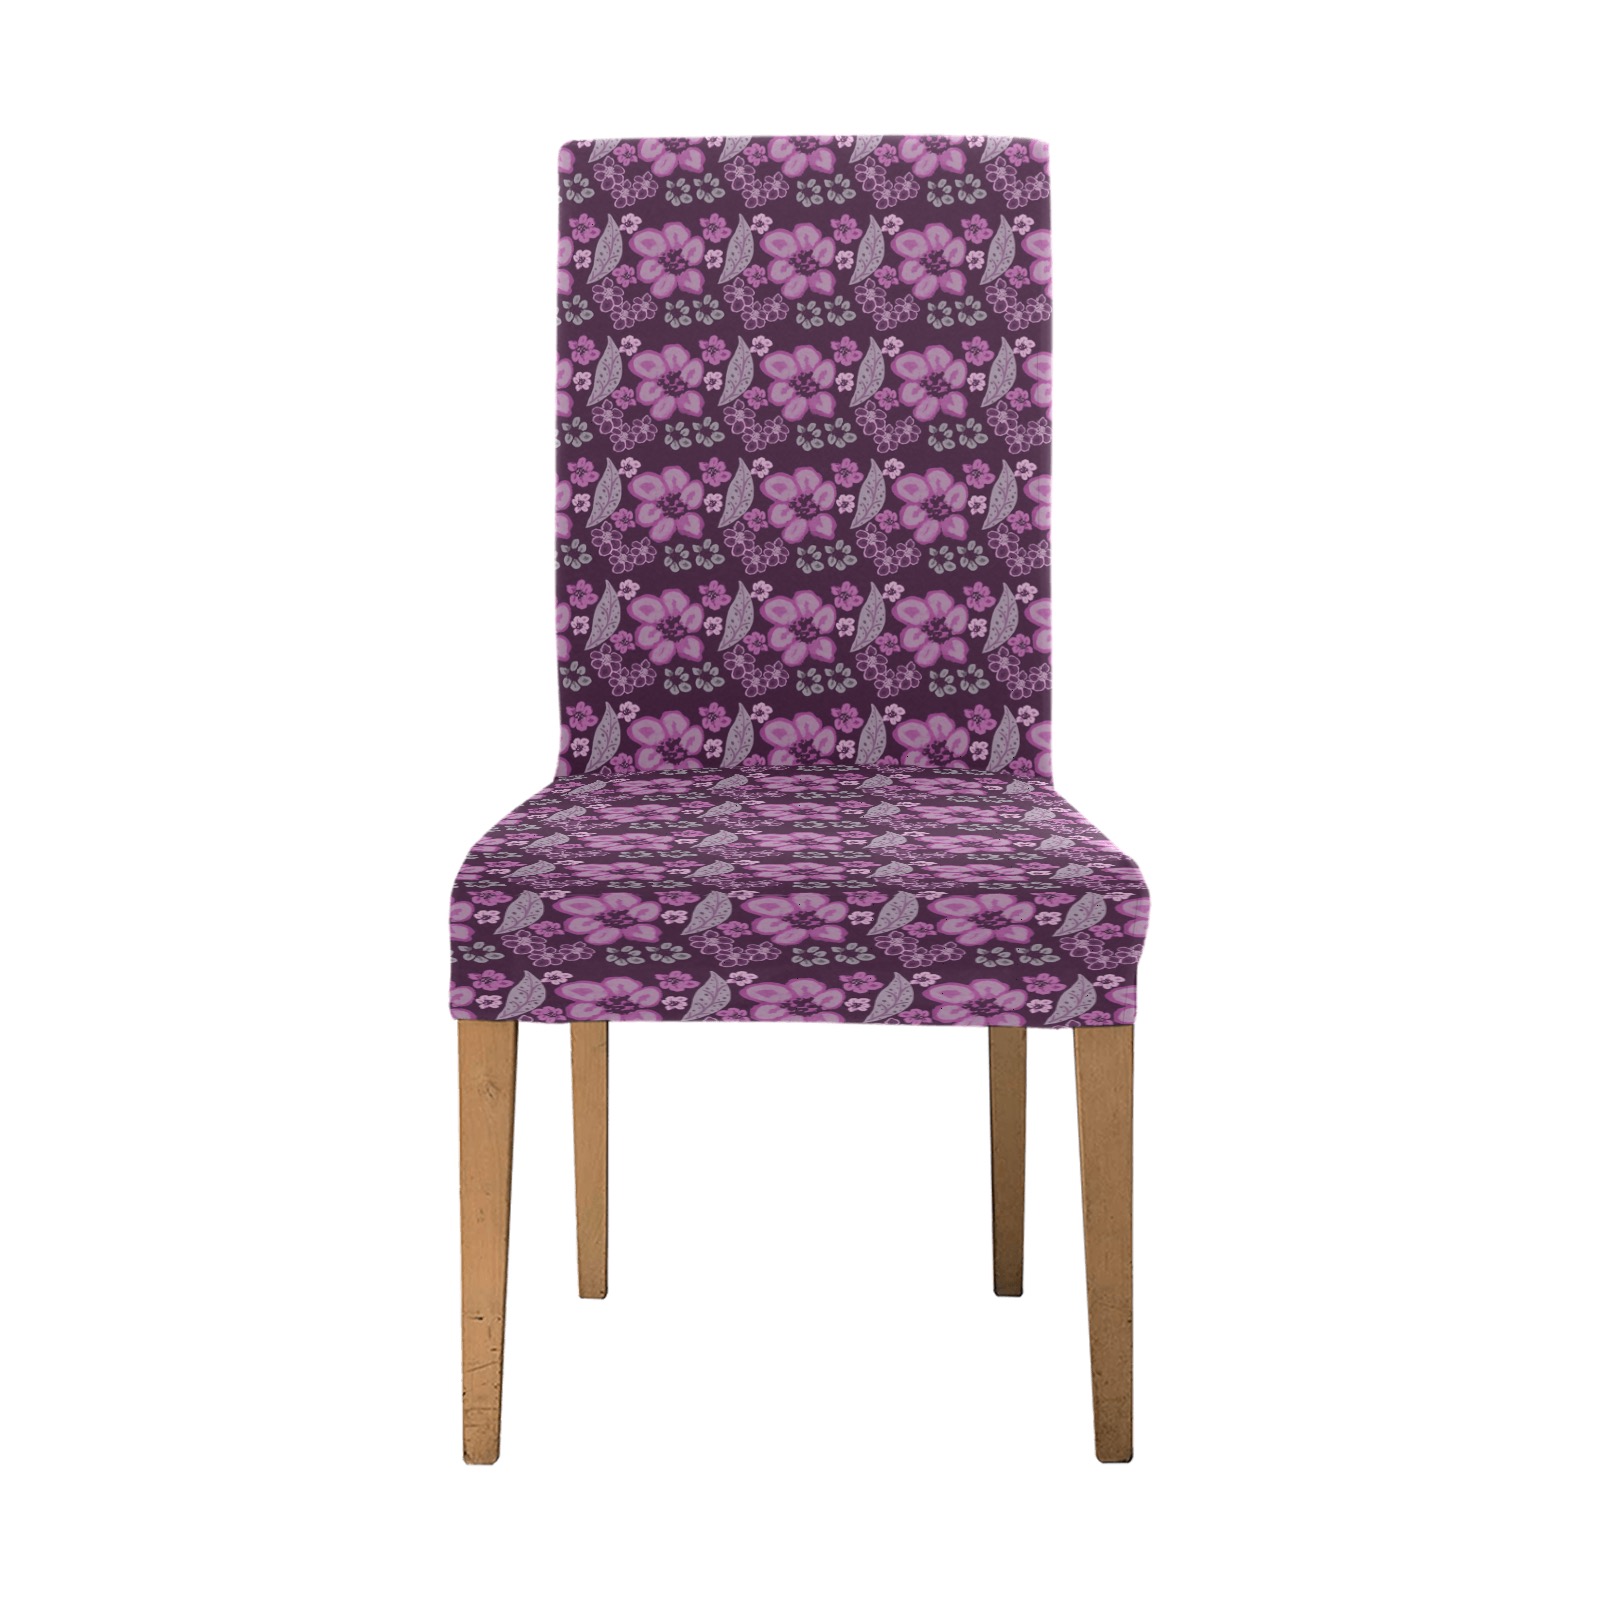 Unique Purple Floral Pattern Removable Dining Chair Cover